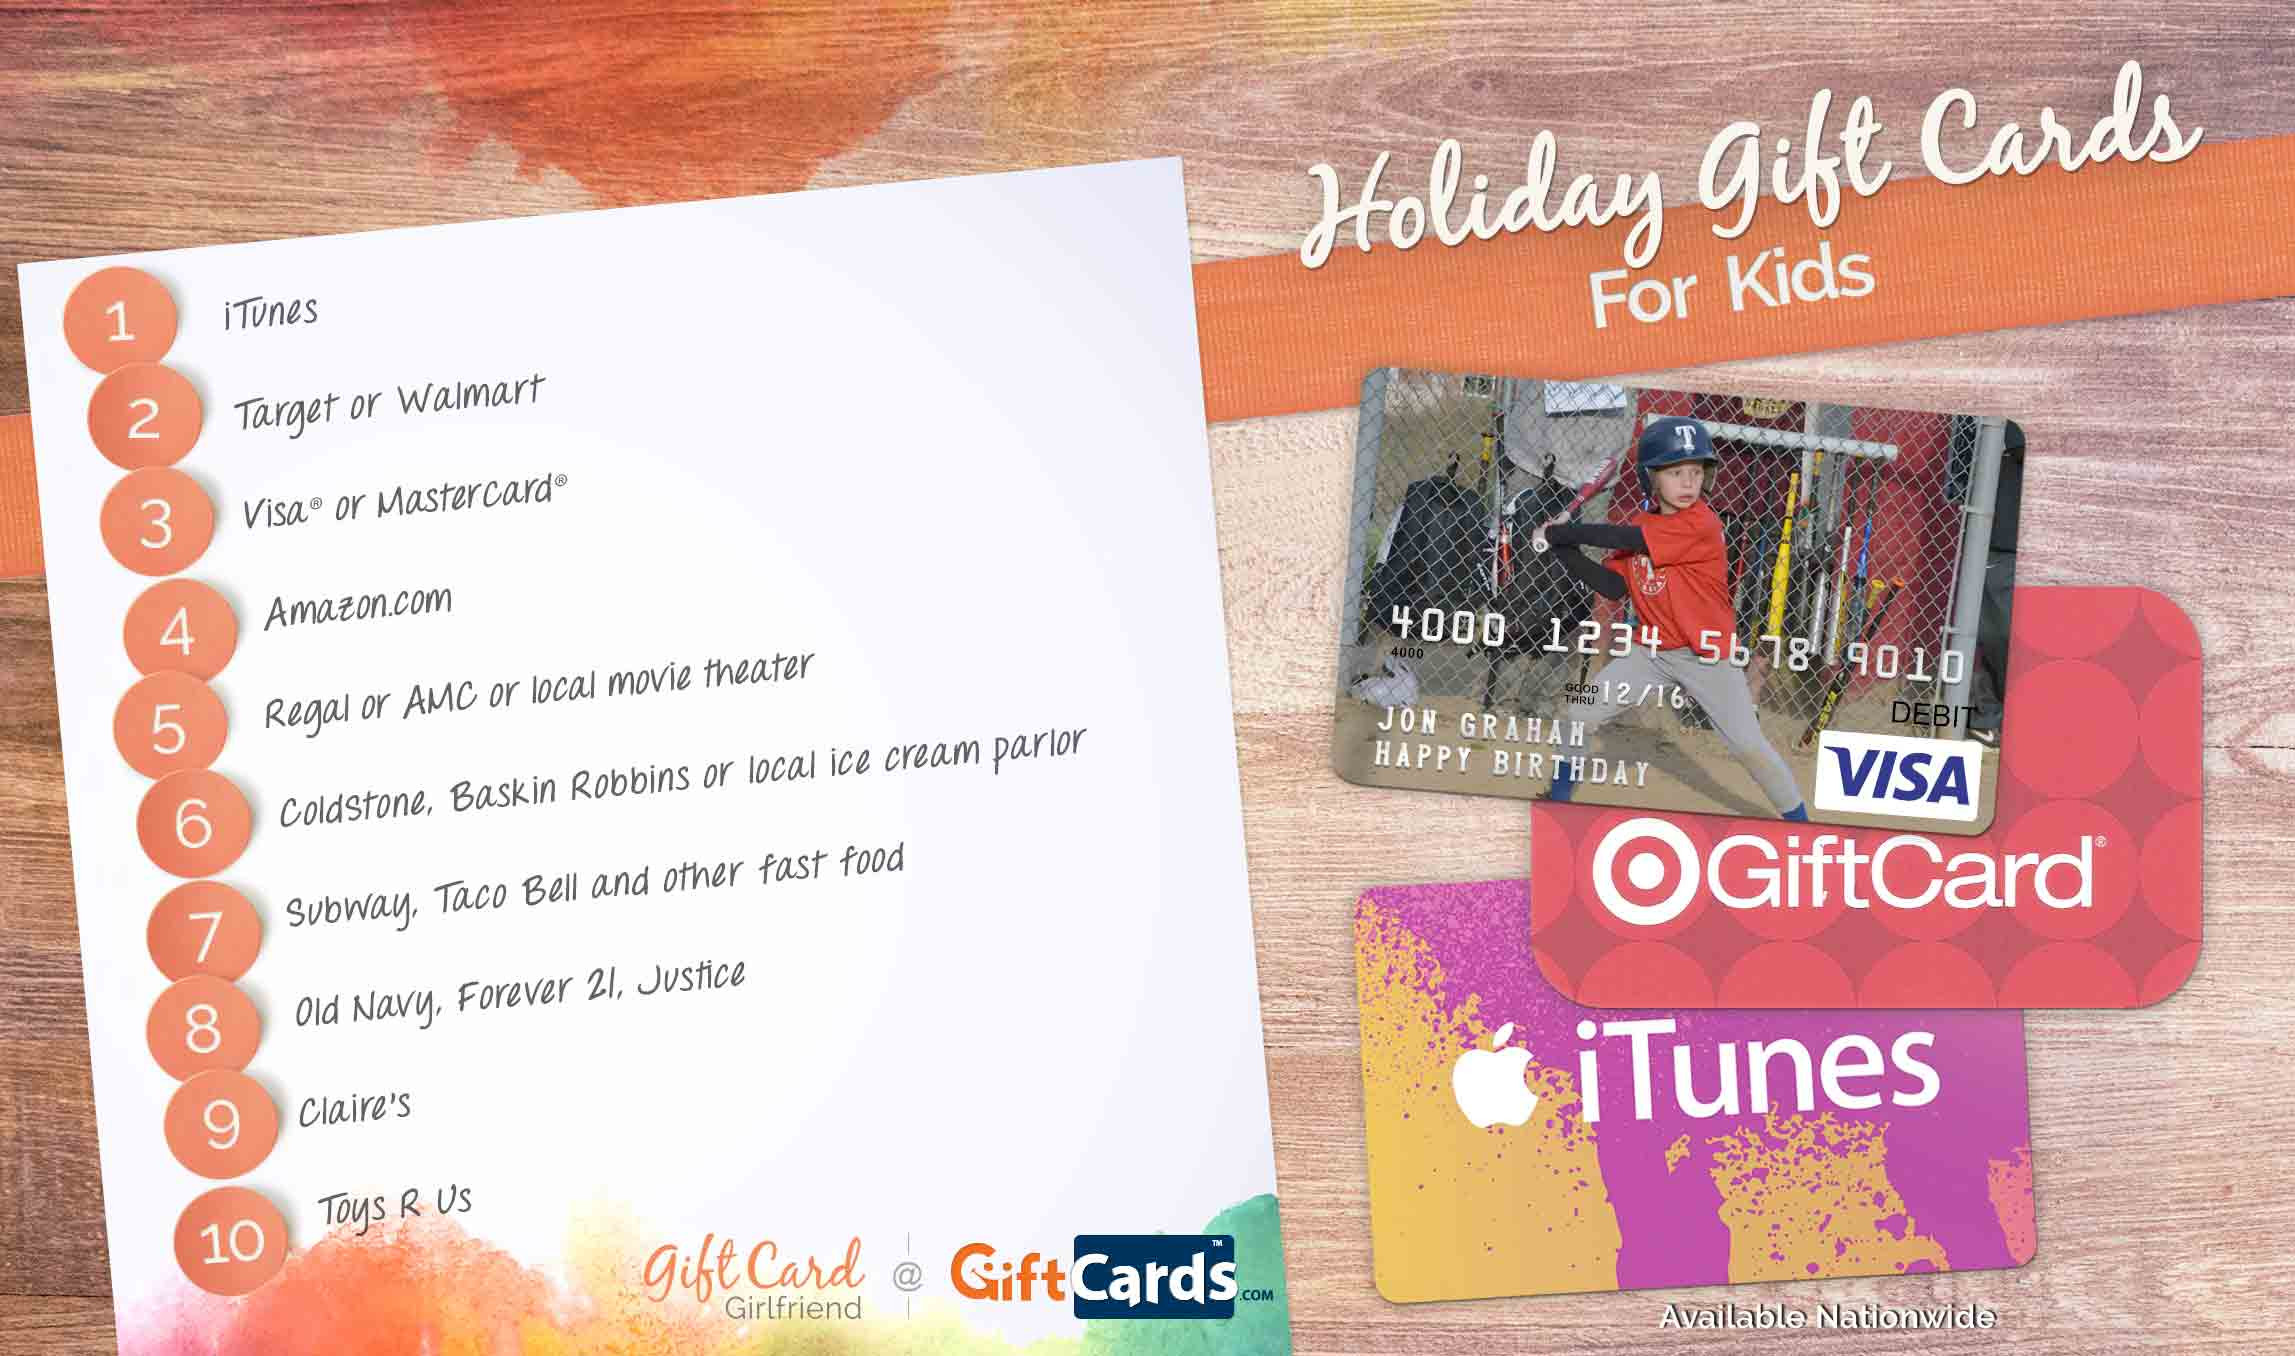 Gift Cards For Kids
 The Best Gift Cards for Kids